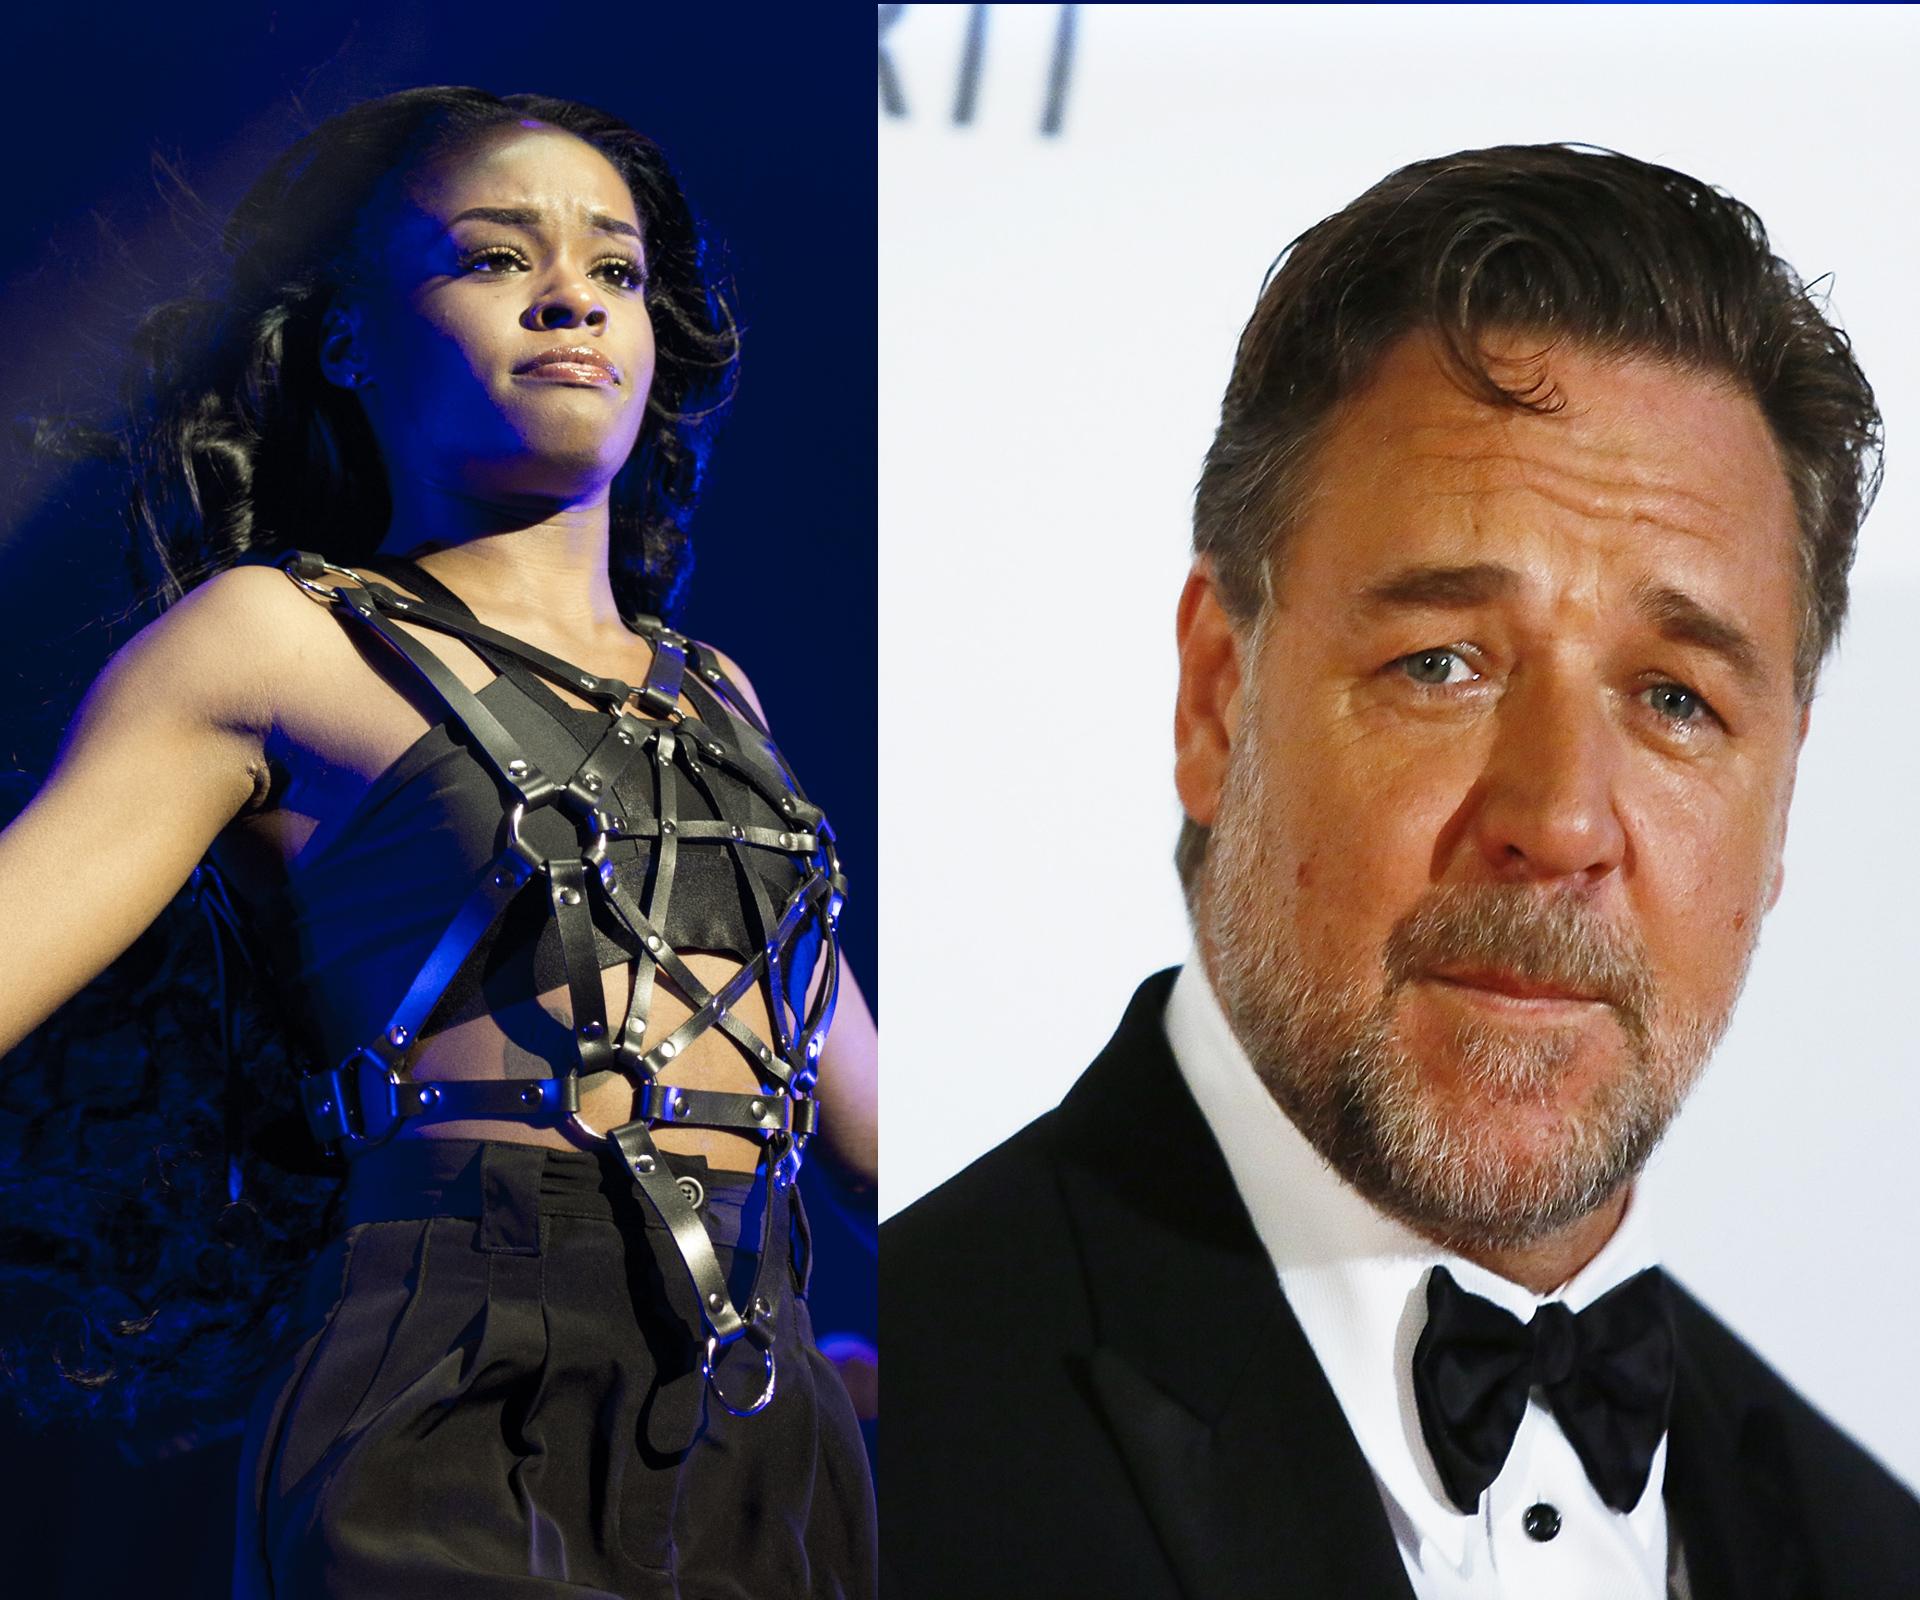 Russell Crowe accused of assault by US rapper Azealia Banks